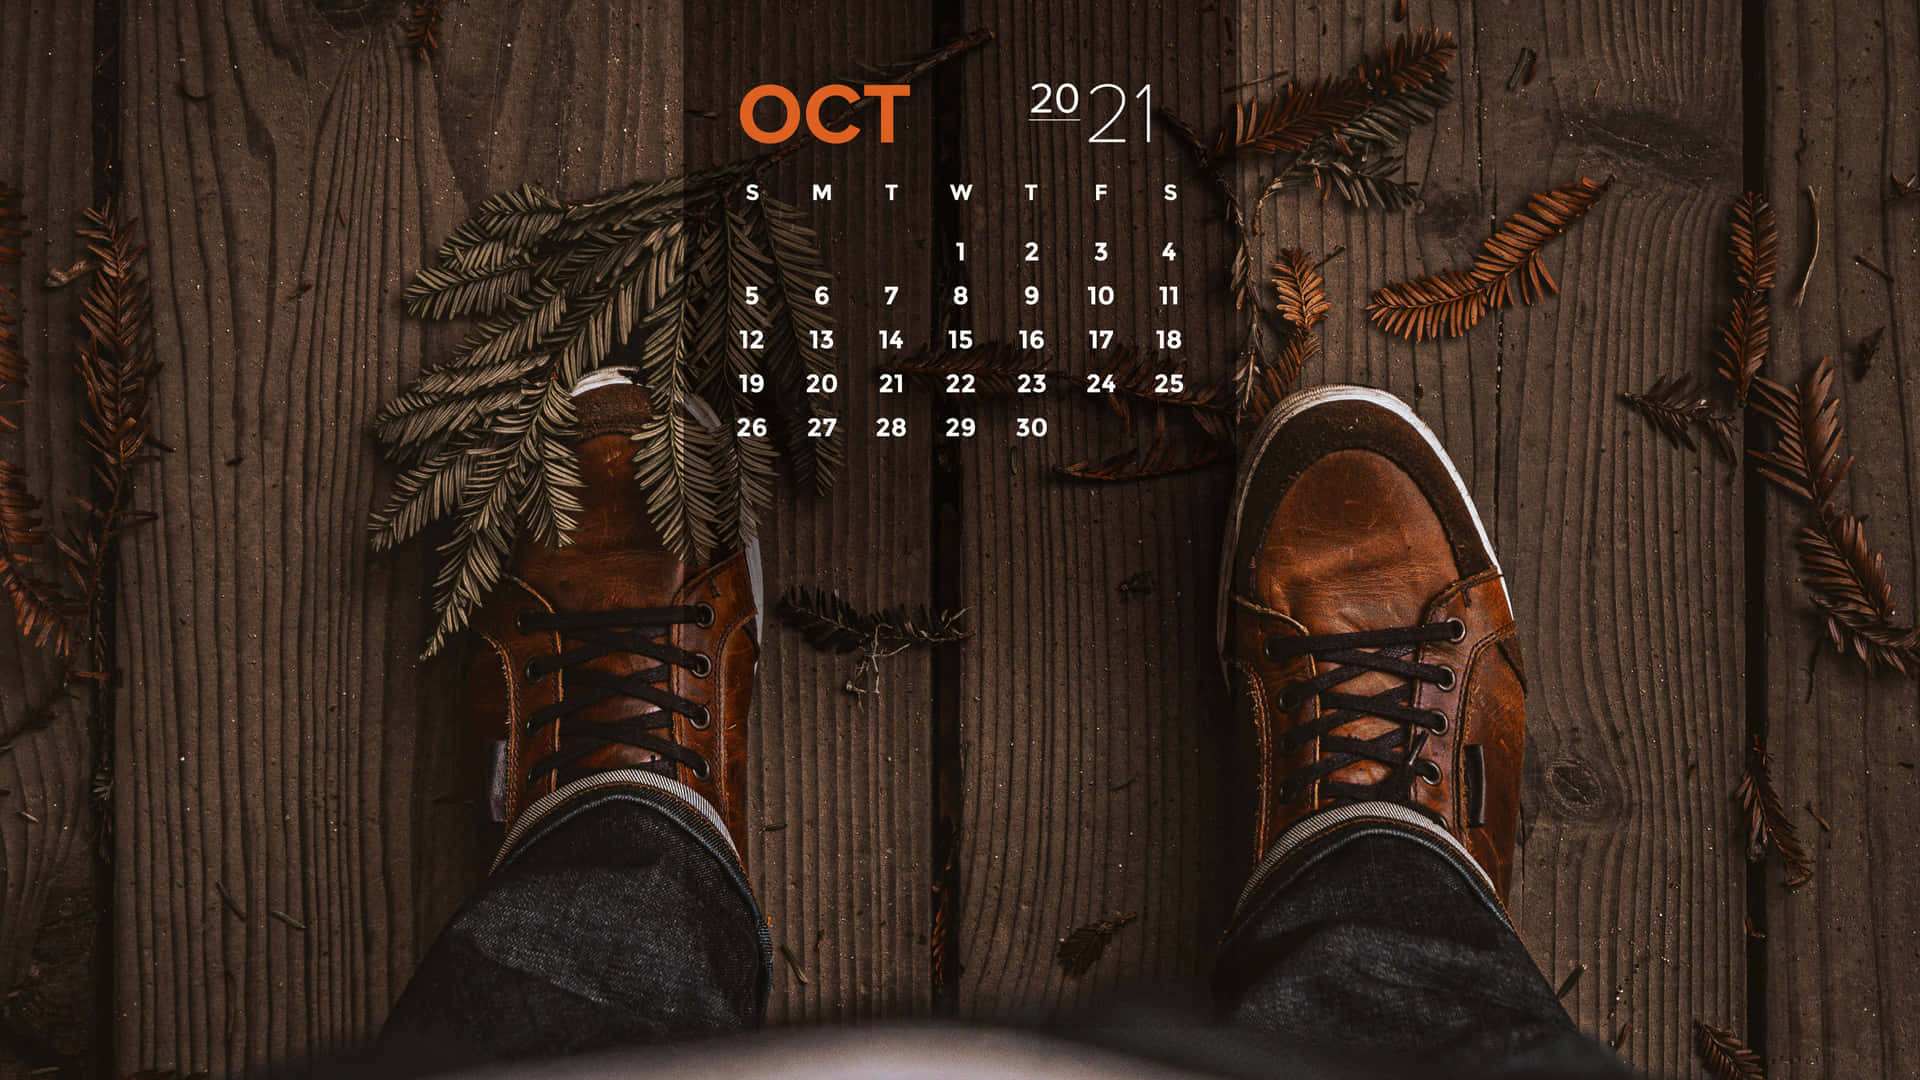 A Calendar With A Person's Feet On It Wallpaper